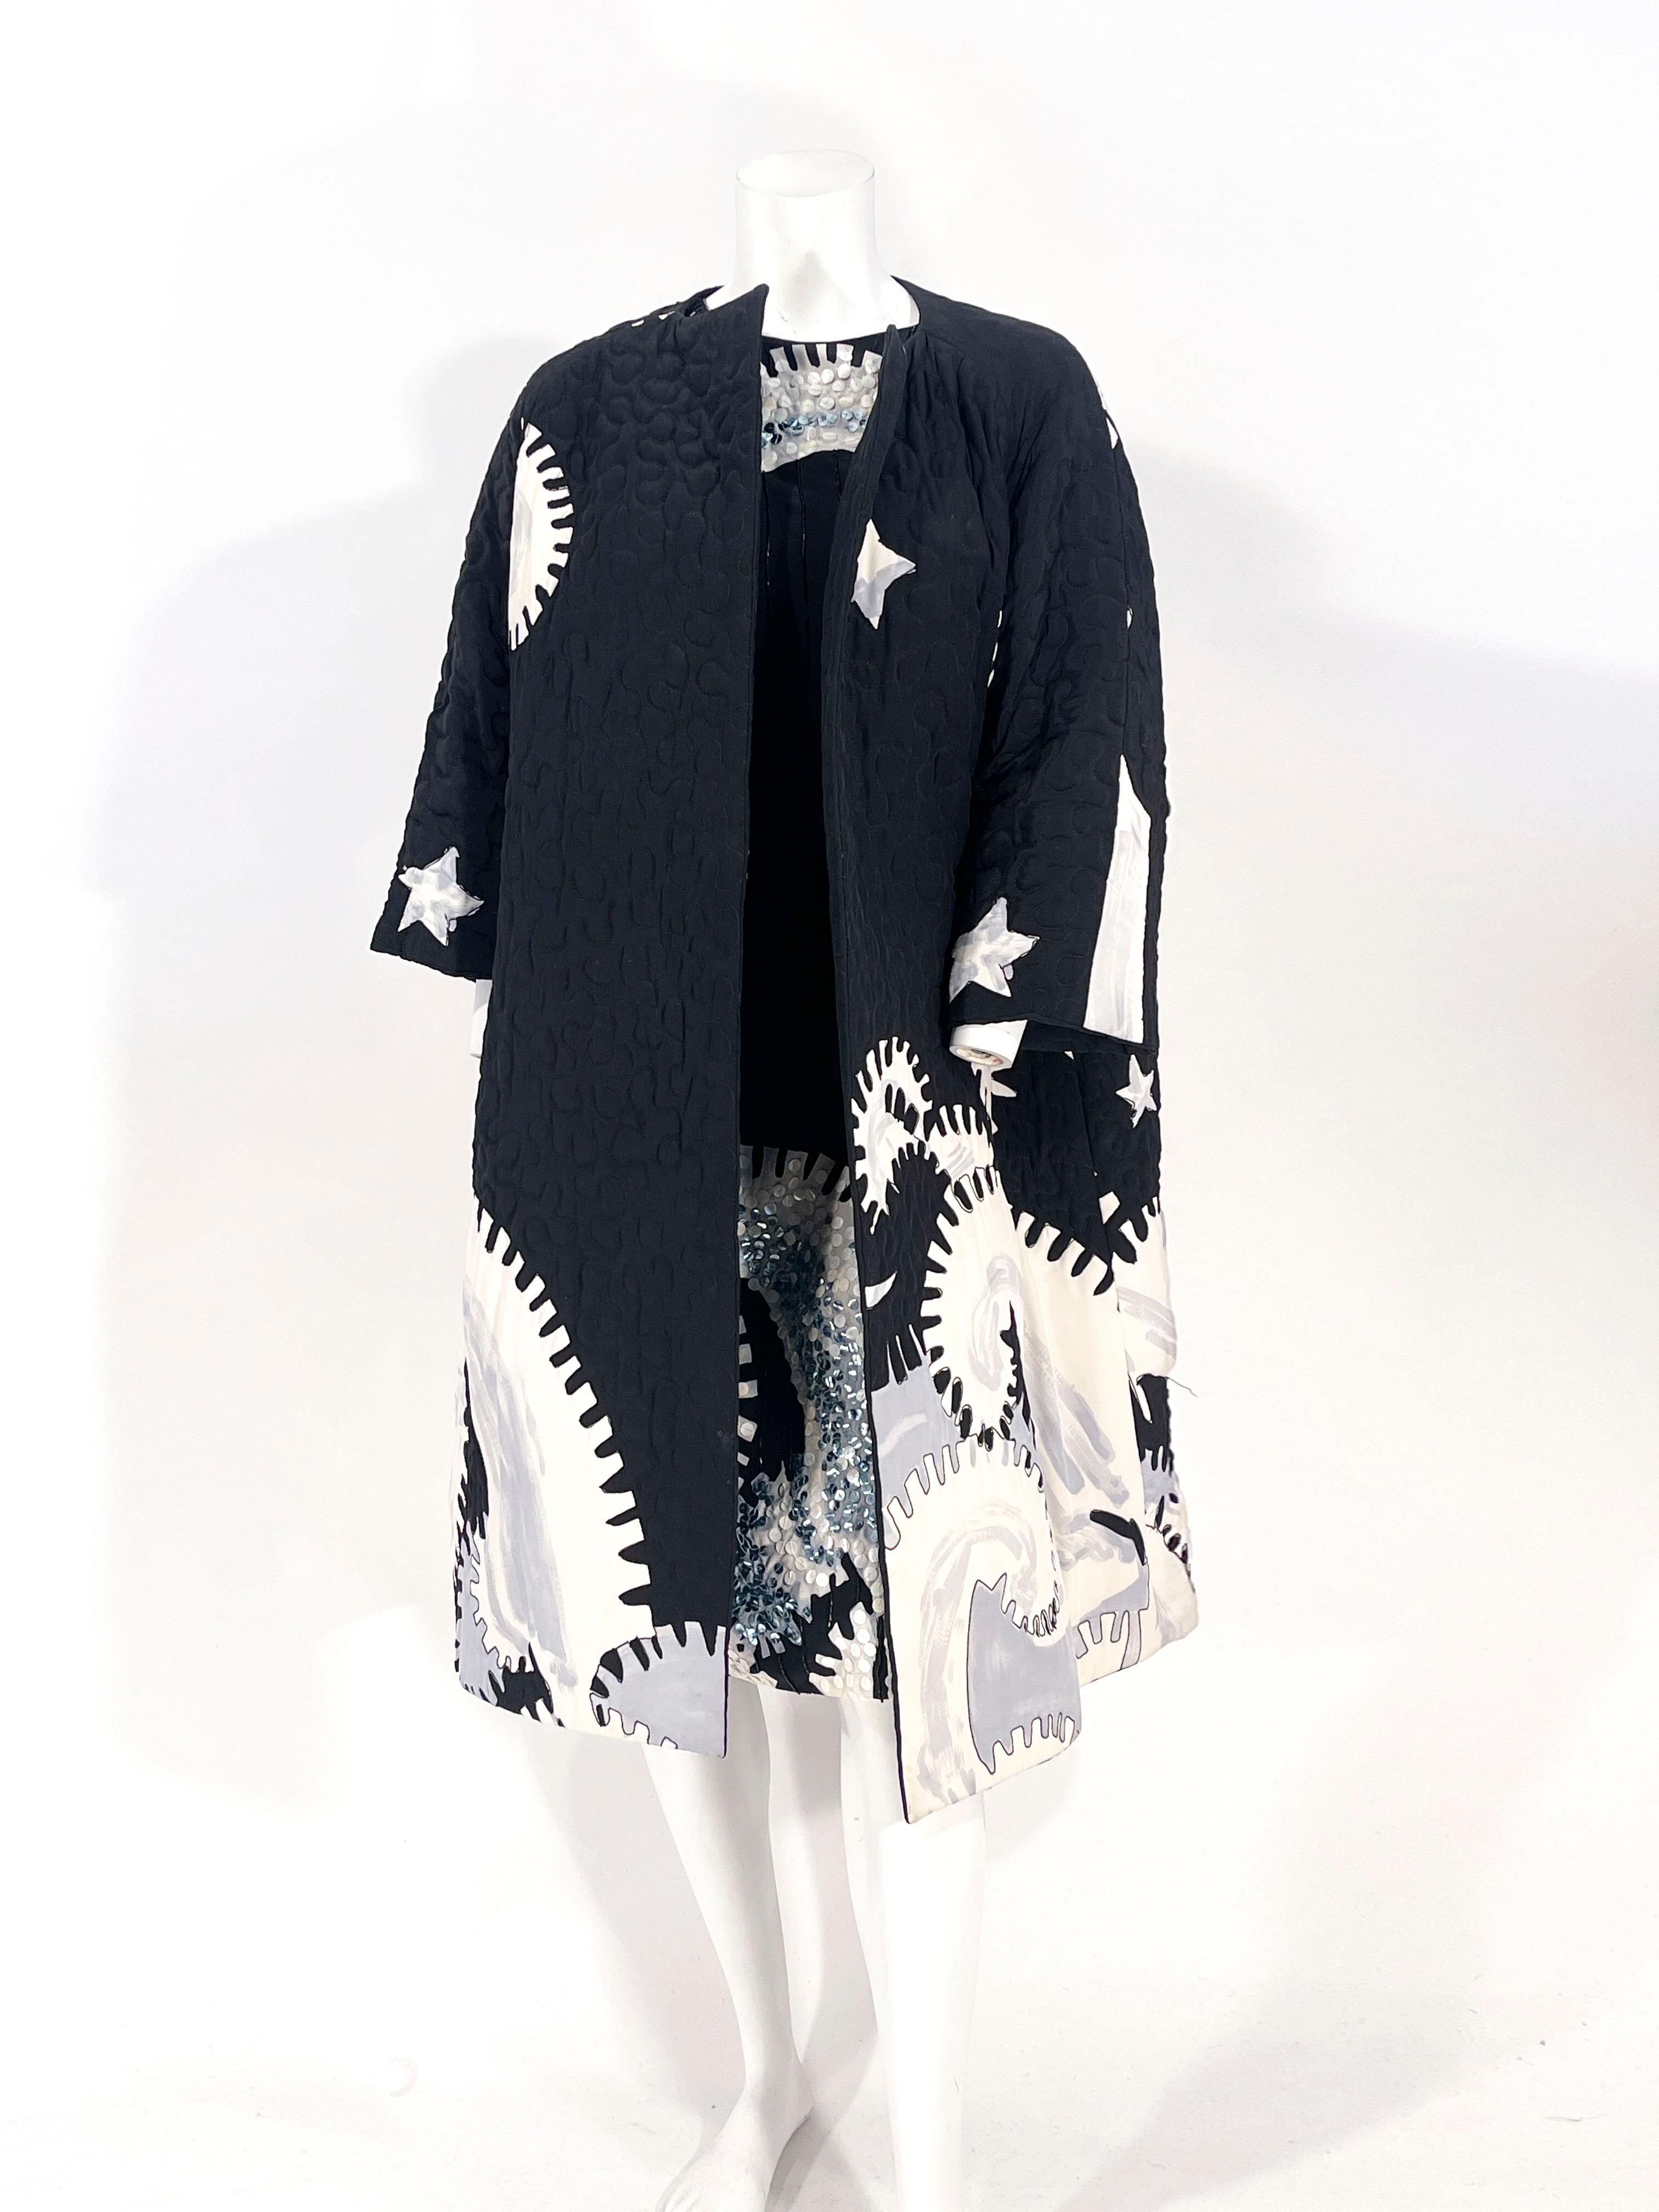 1980s Michaele Vollbracht coat and dress ensemble, both of which are featuring an abstract painterly print in black white grey and blue tones. The straight waisted and sleeveless dress has accent beading and sequin to accentuate the printed